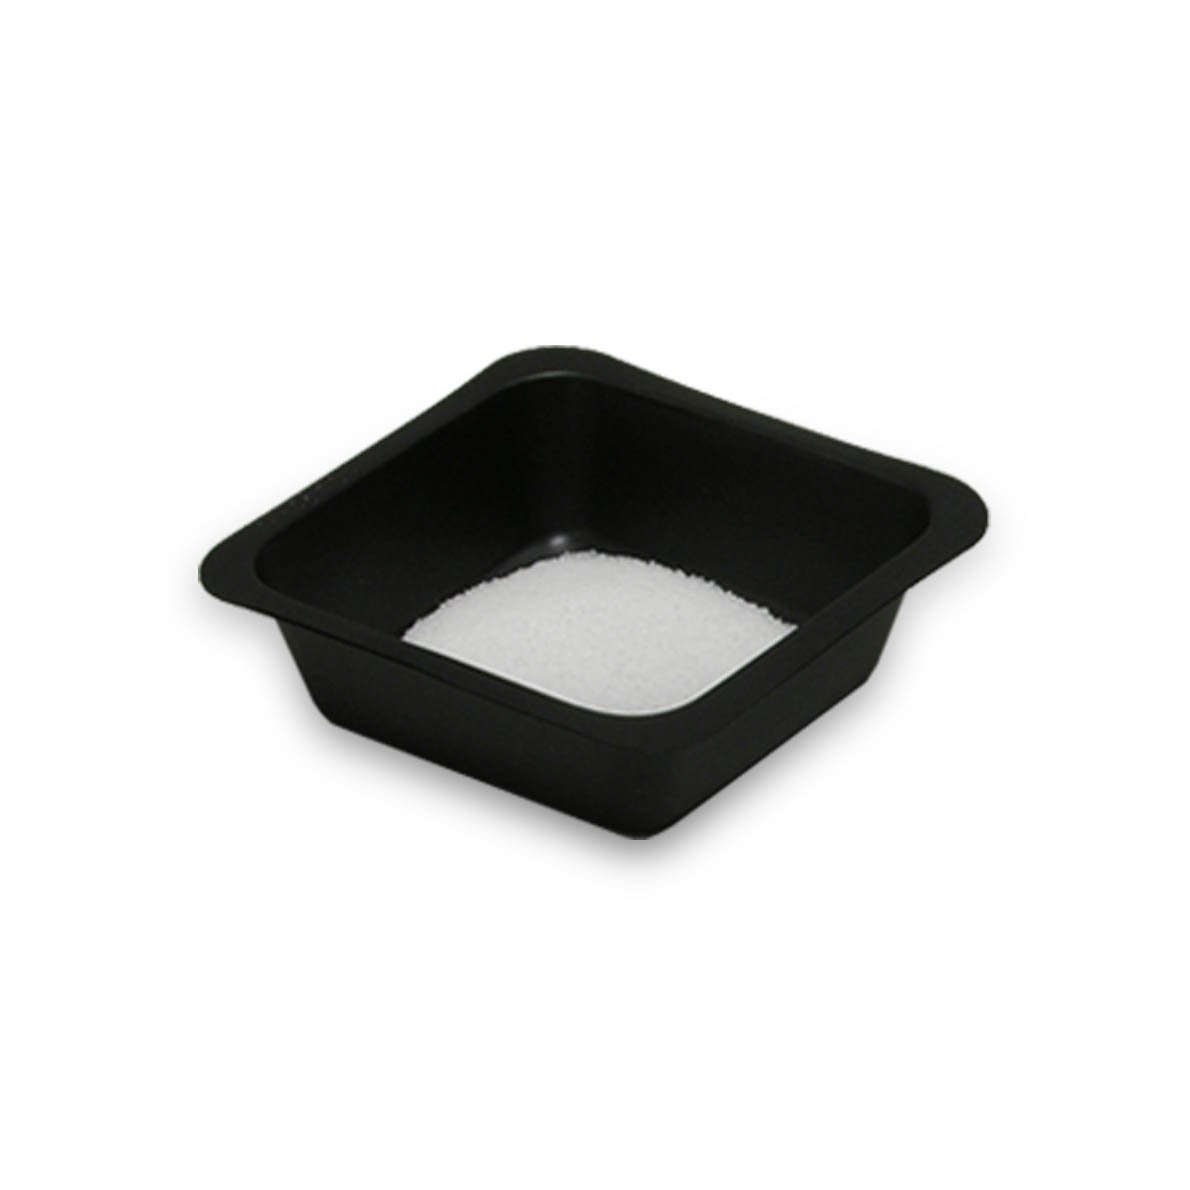 100mL Black Antistatic Polystyrene Square Weigh Boat (10 Packs/Case - 500/Pack)